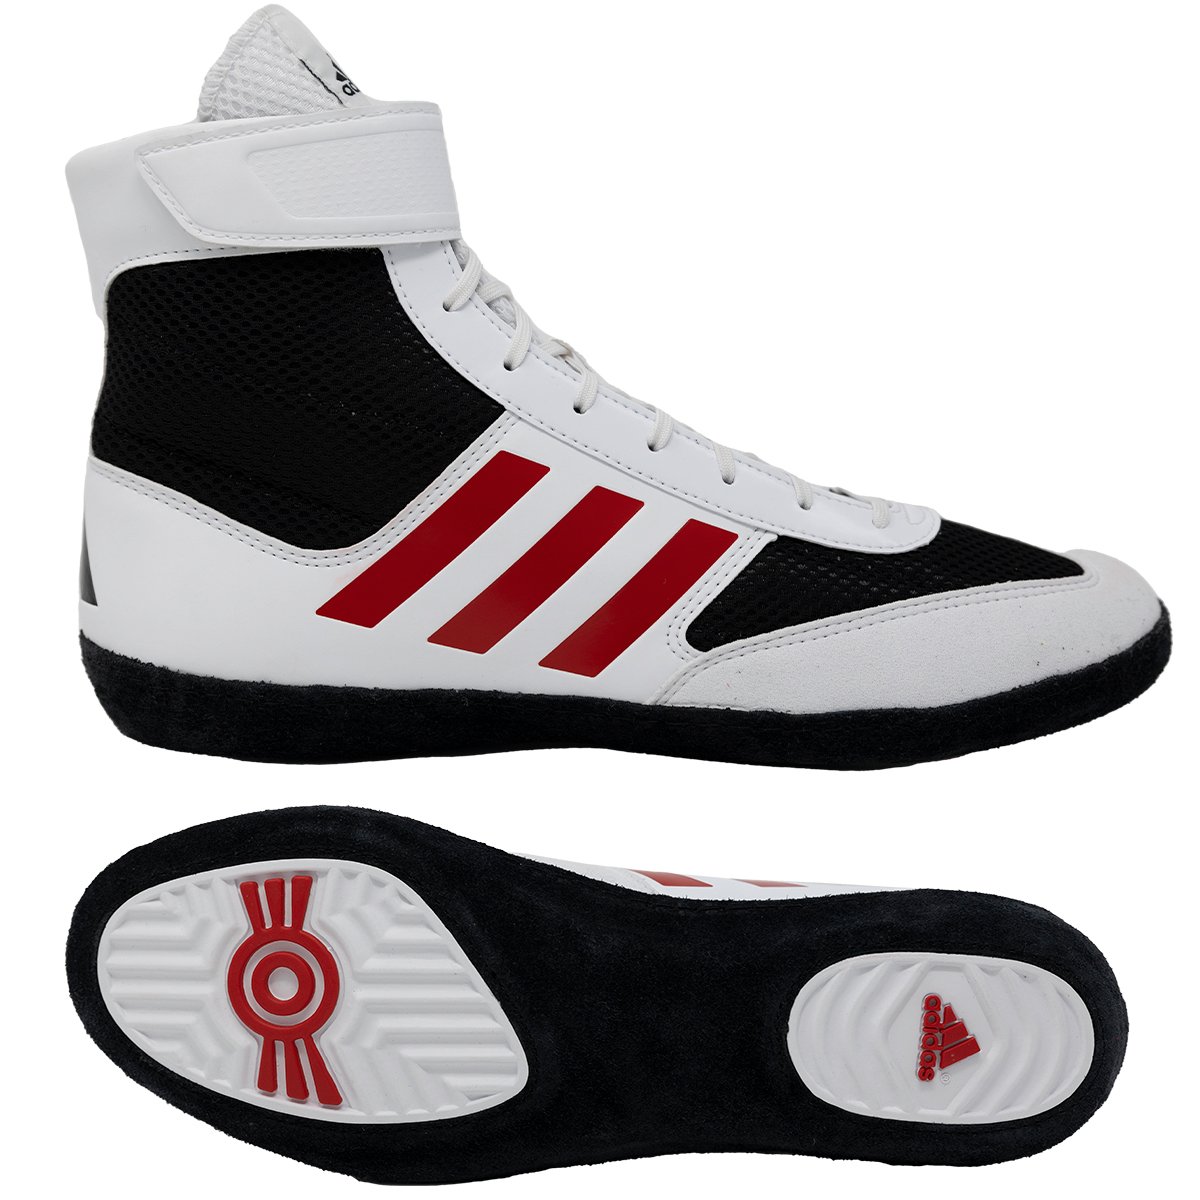 NEW-Adidas Combat Speed 5 Wrestling Shoe, color: Black/White/Red